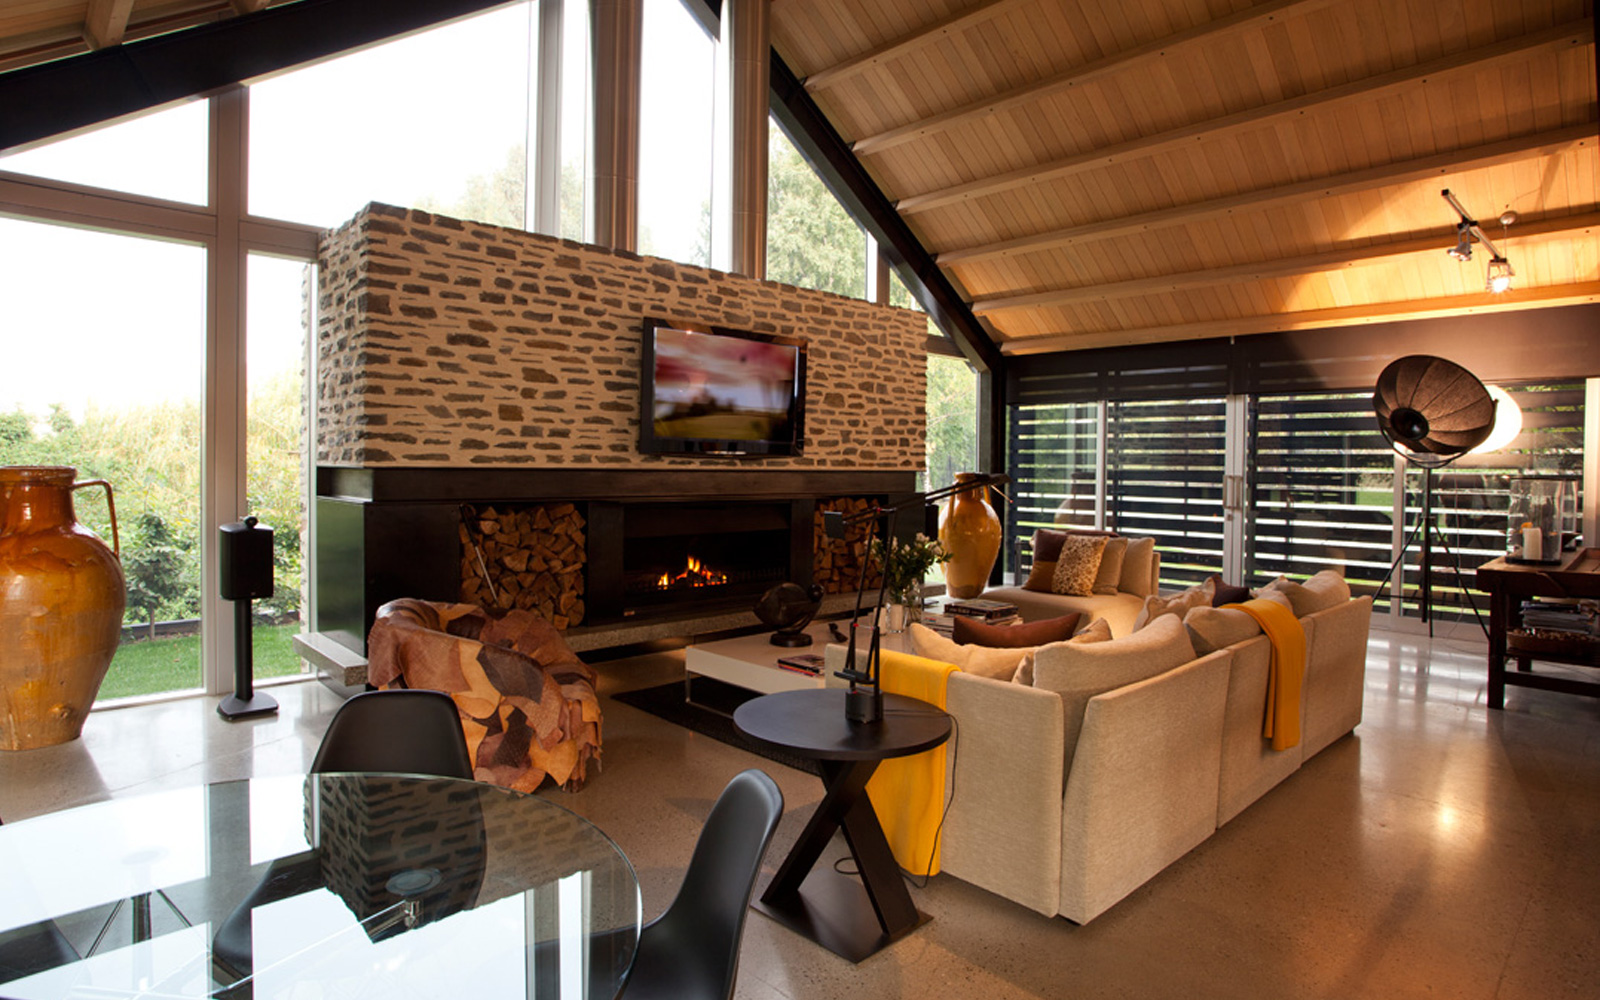 Large architecturally designed stone fireplace